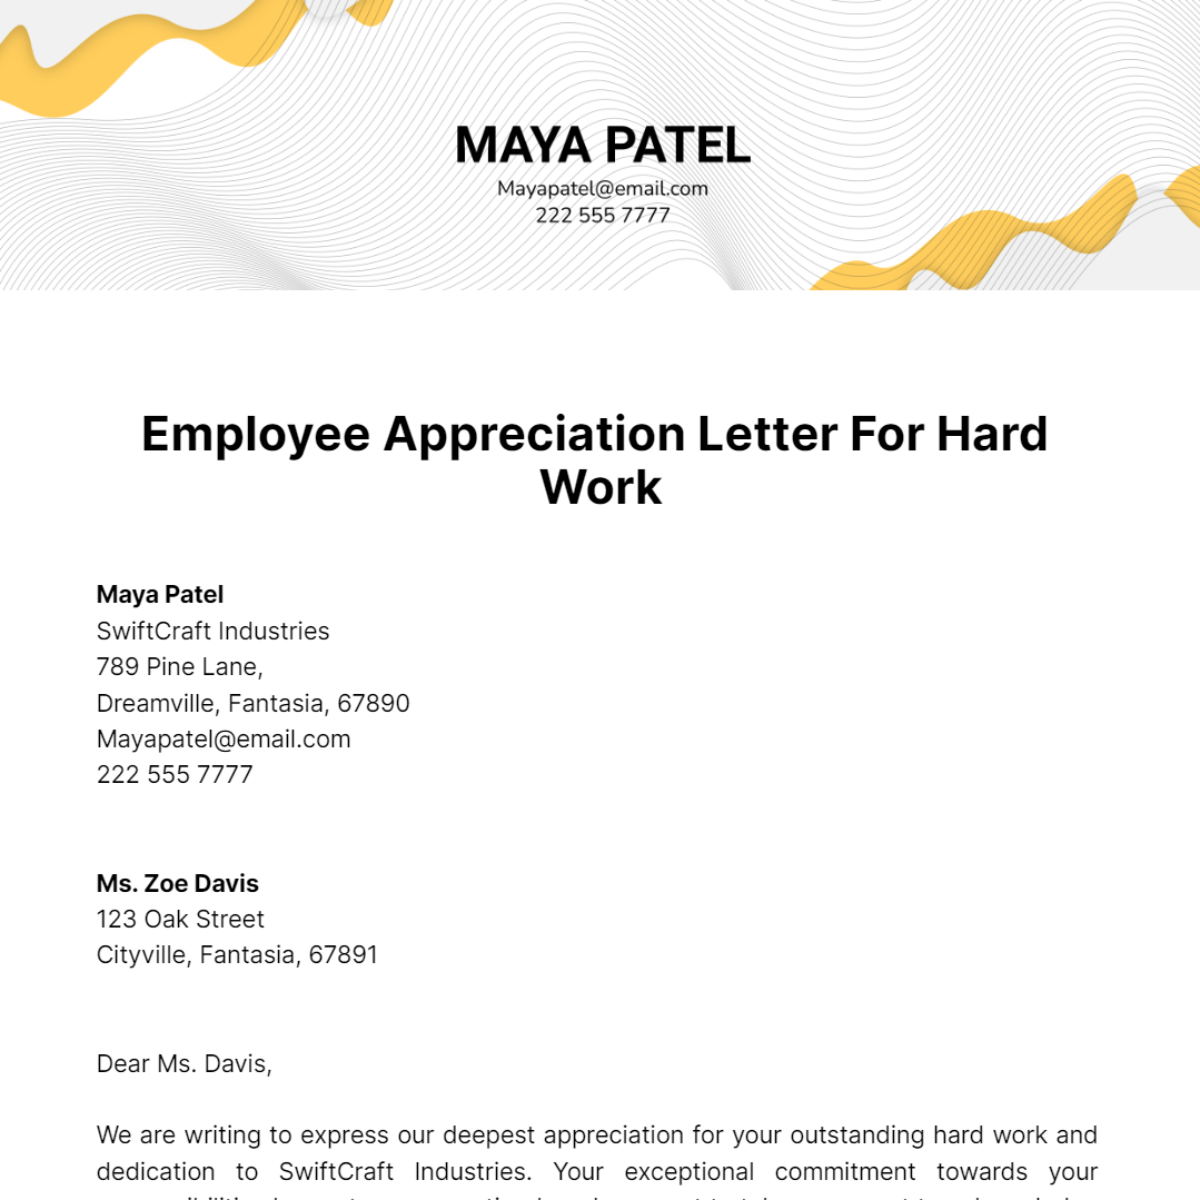 Employee Appreciation Letter For Hard Work Template